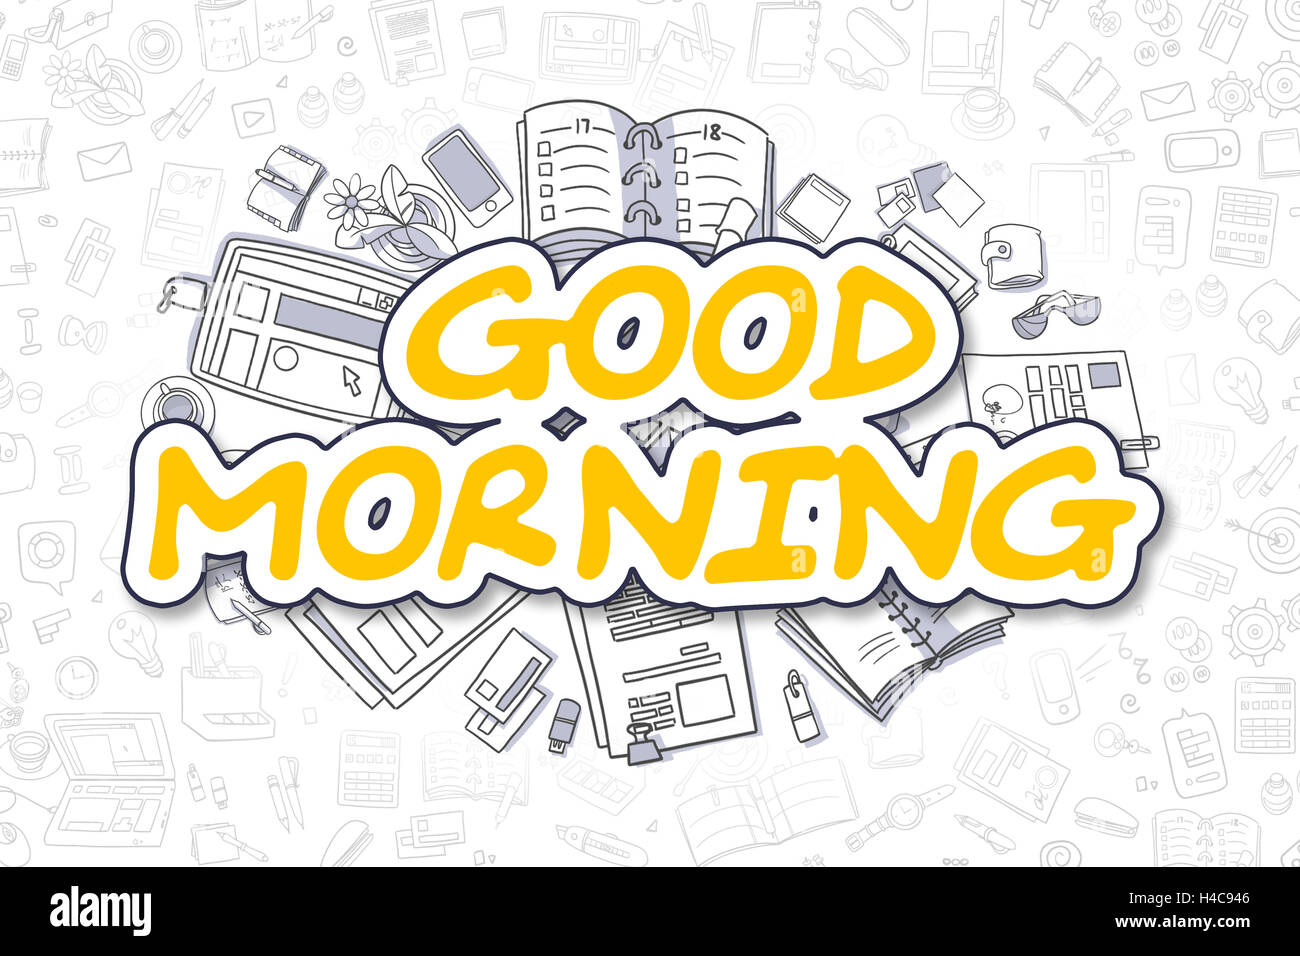 Good Morning - Doodle Yellow Text. Business Concept. Stock Photo